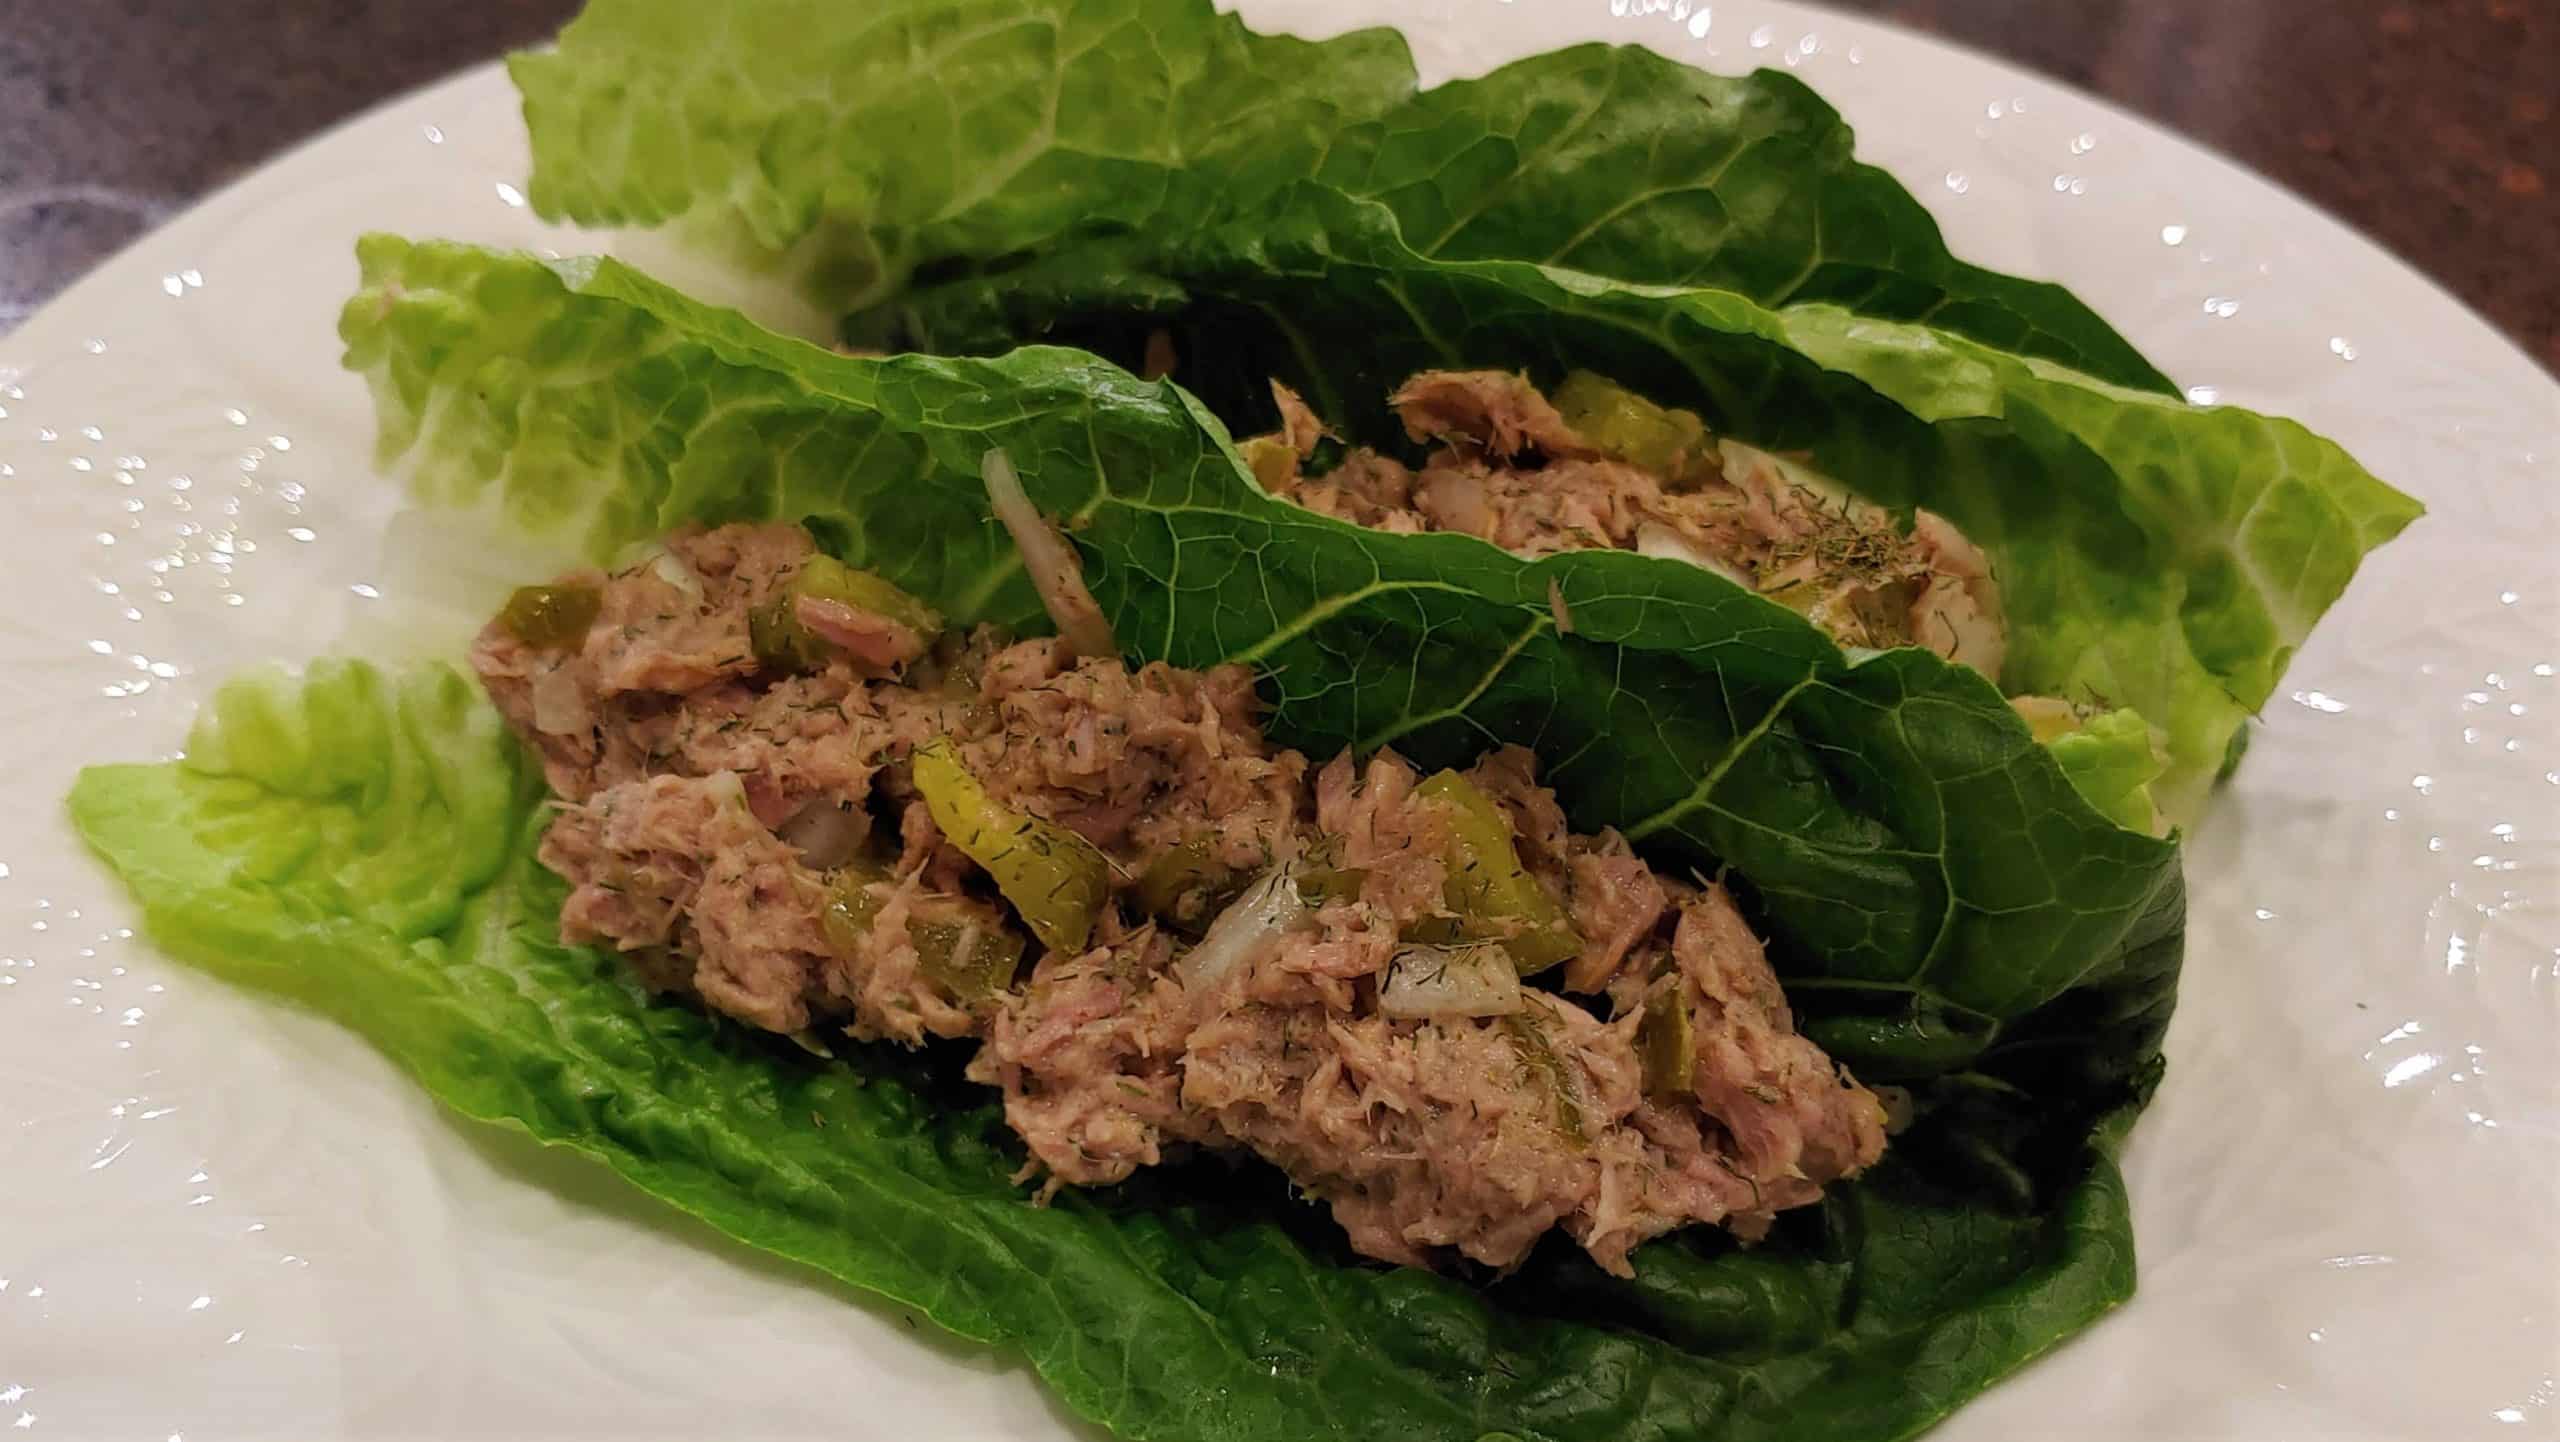 lettuce wraps - Dining in with Danielle